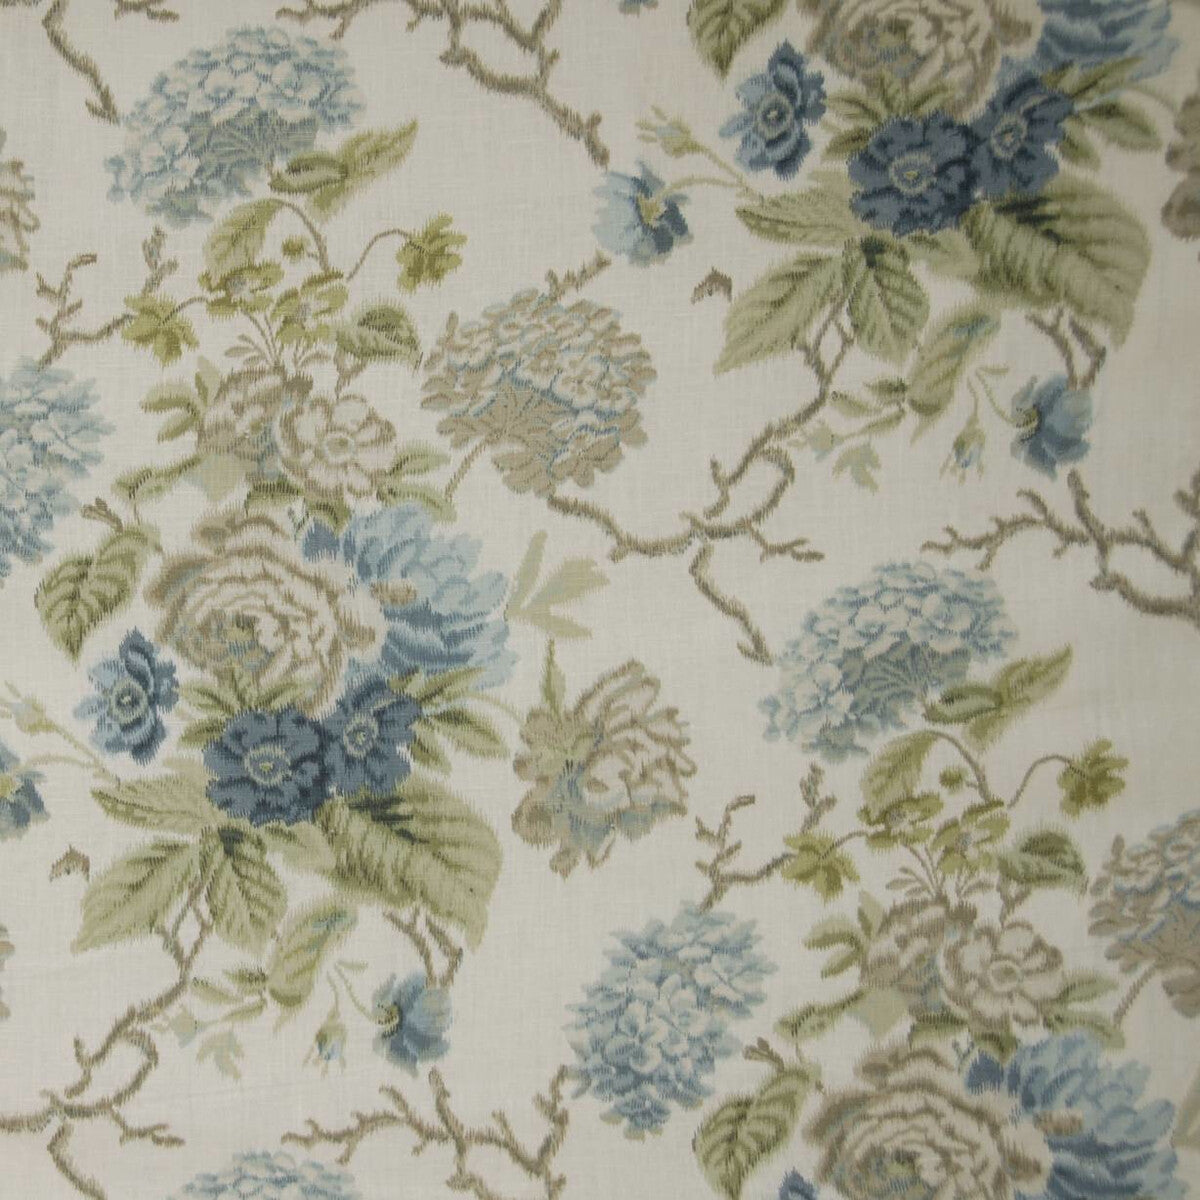 Chelverton II fabric in blue/green color - pattern BFC-3505.53.0 - by Lee Jofa in the Blithfield collection